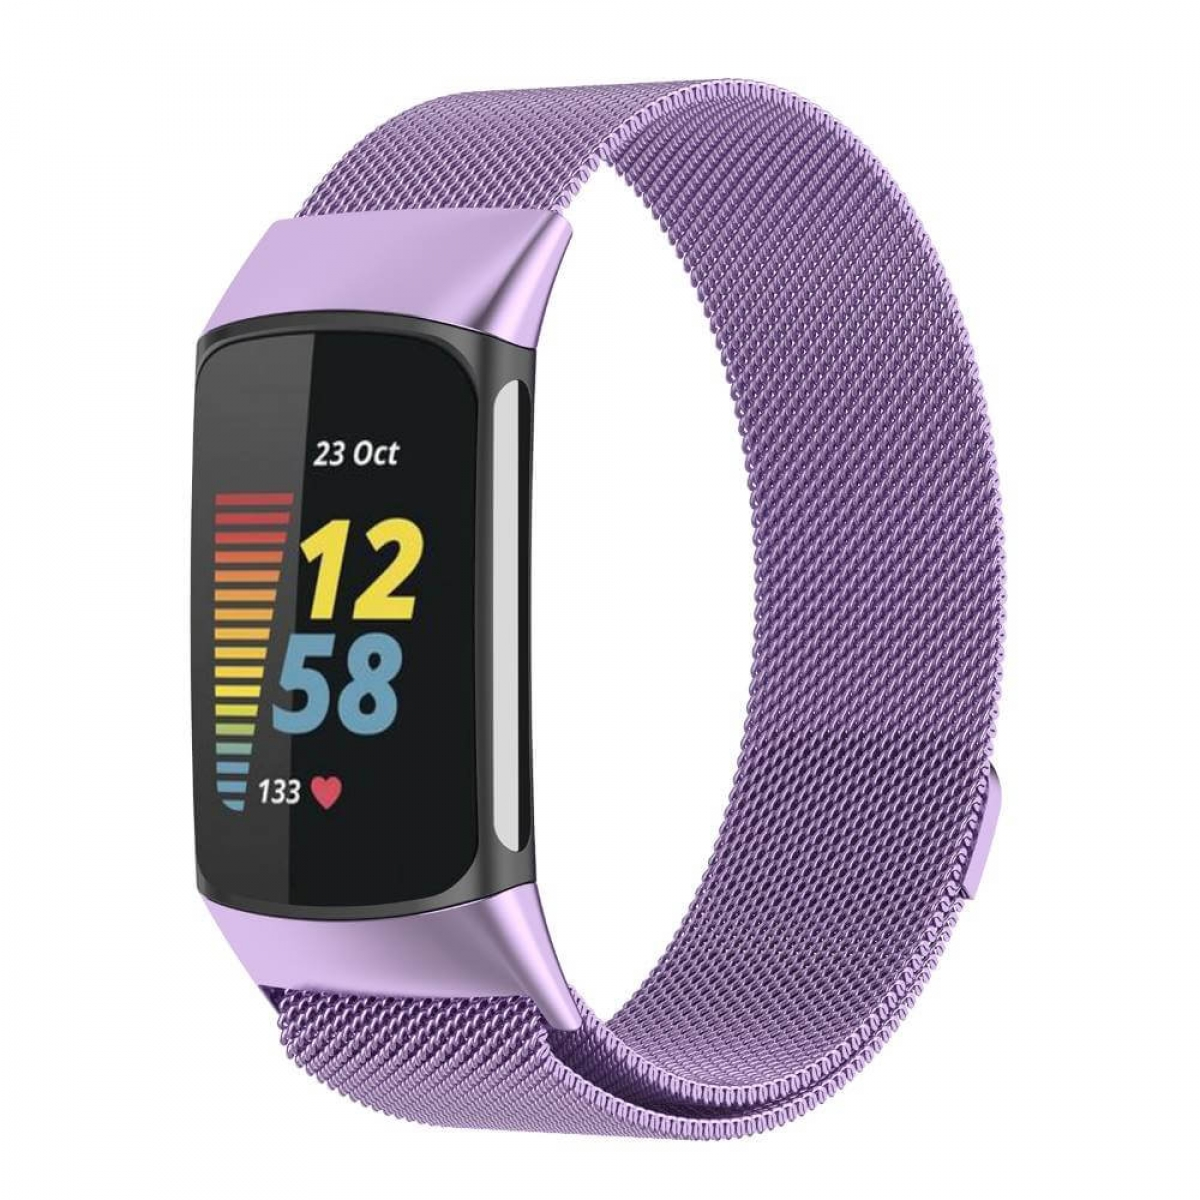 Charge Smartband, Fitbit Multicolor Milanaise, CASEONLINE Fitbit, 5,